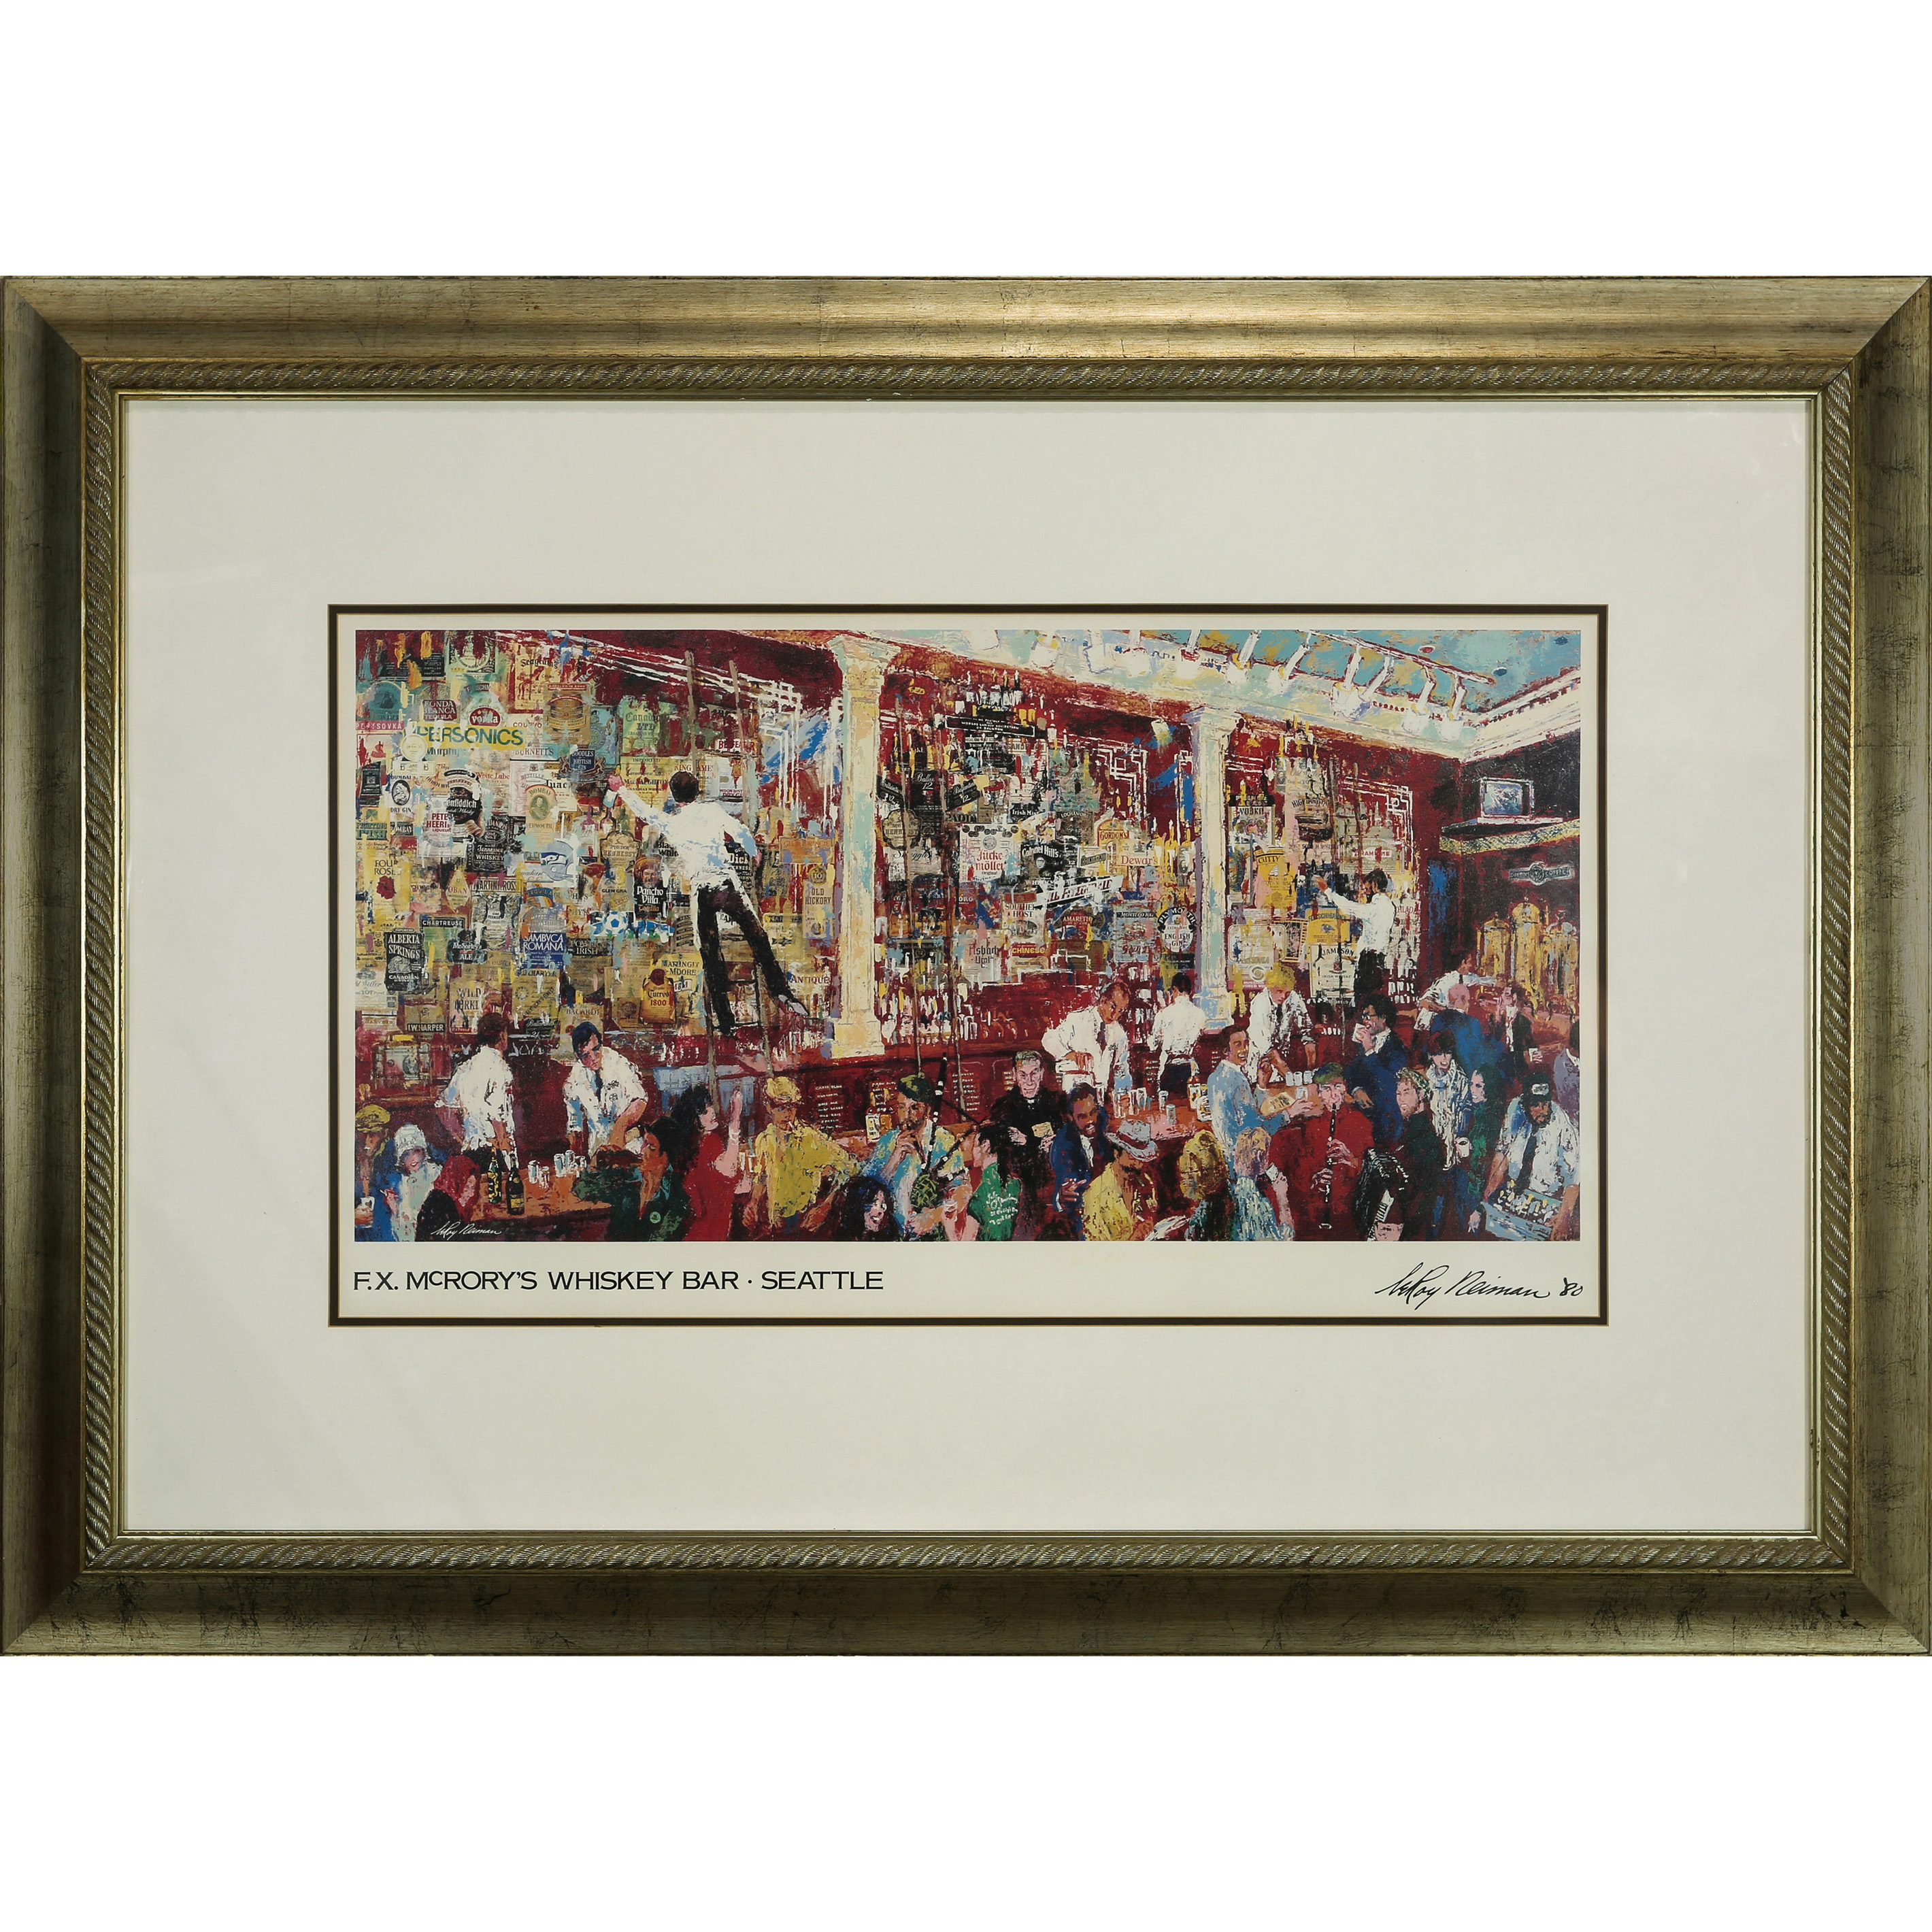 PRINT AFTER LEROY NEIMAN After 3a448b